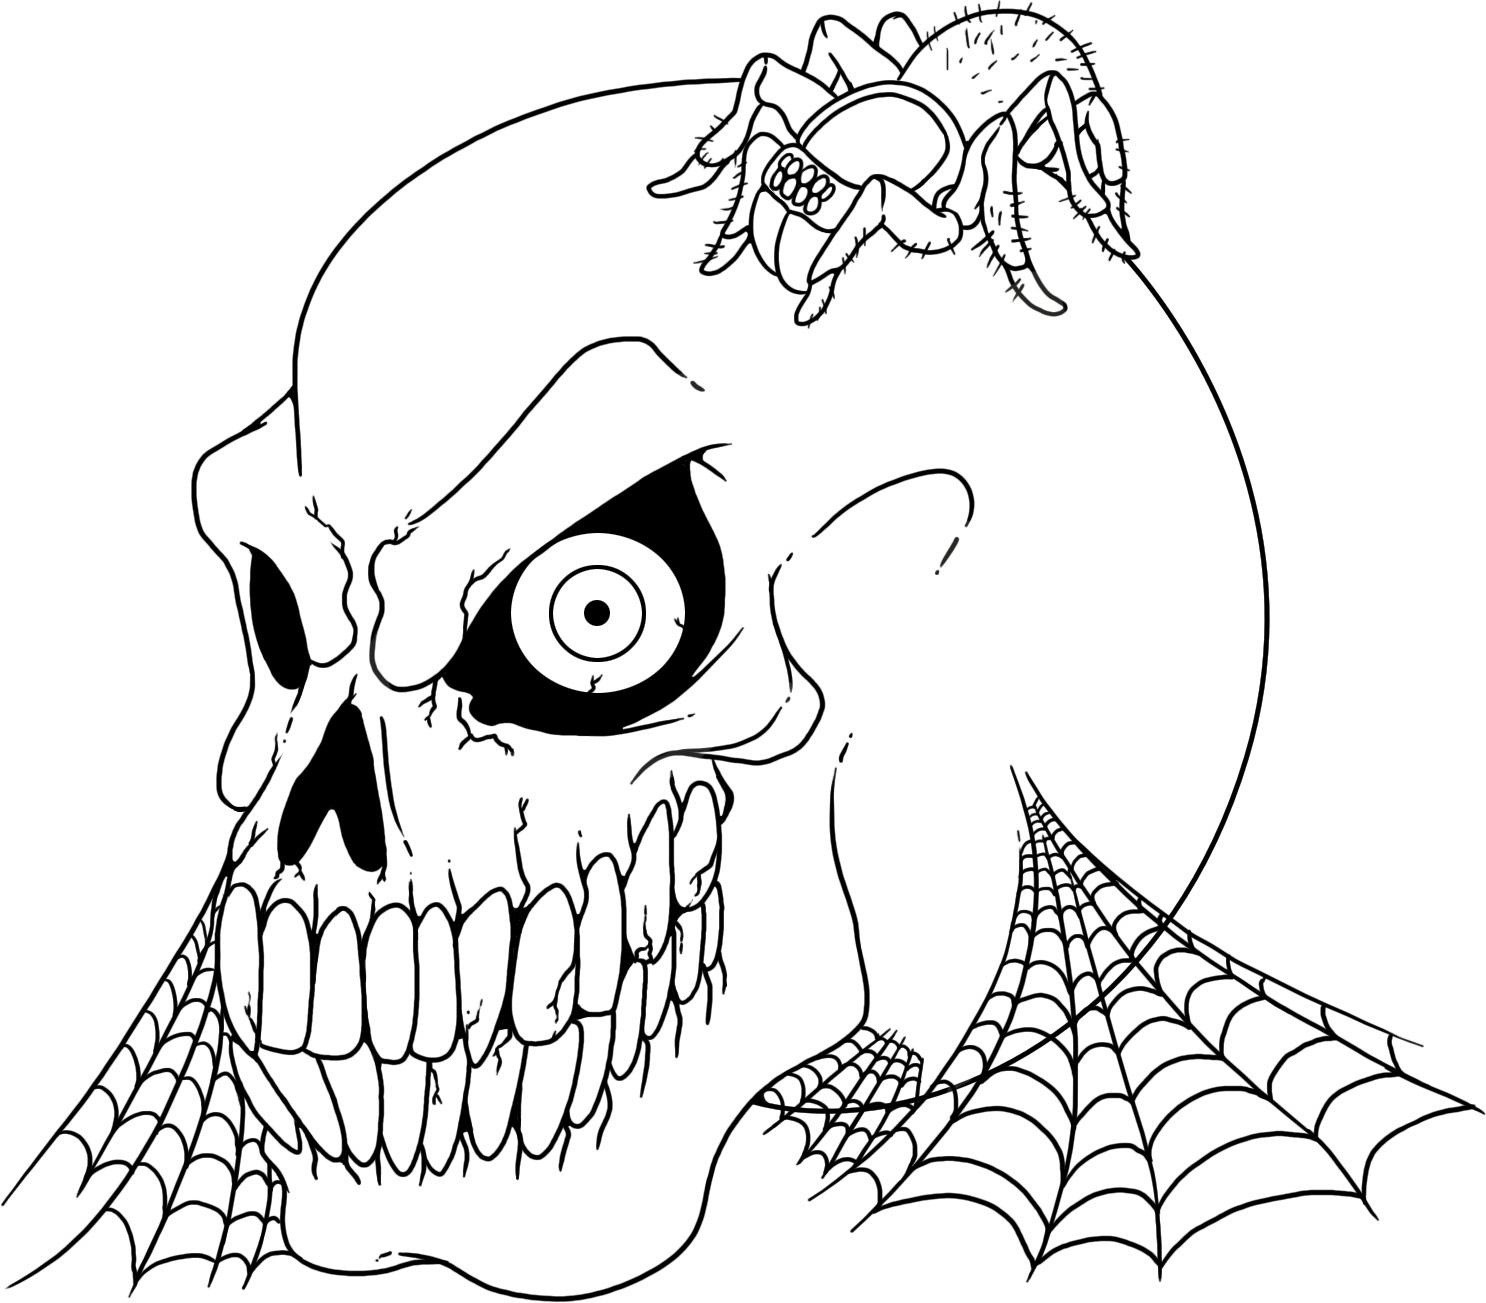 Boys Skull Coloring Pages
 Free Printable Skull Coloring Pages For Kids